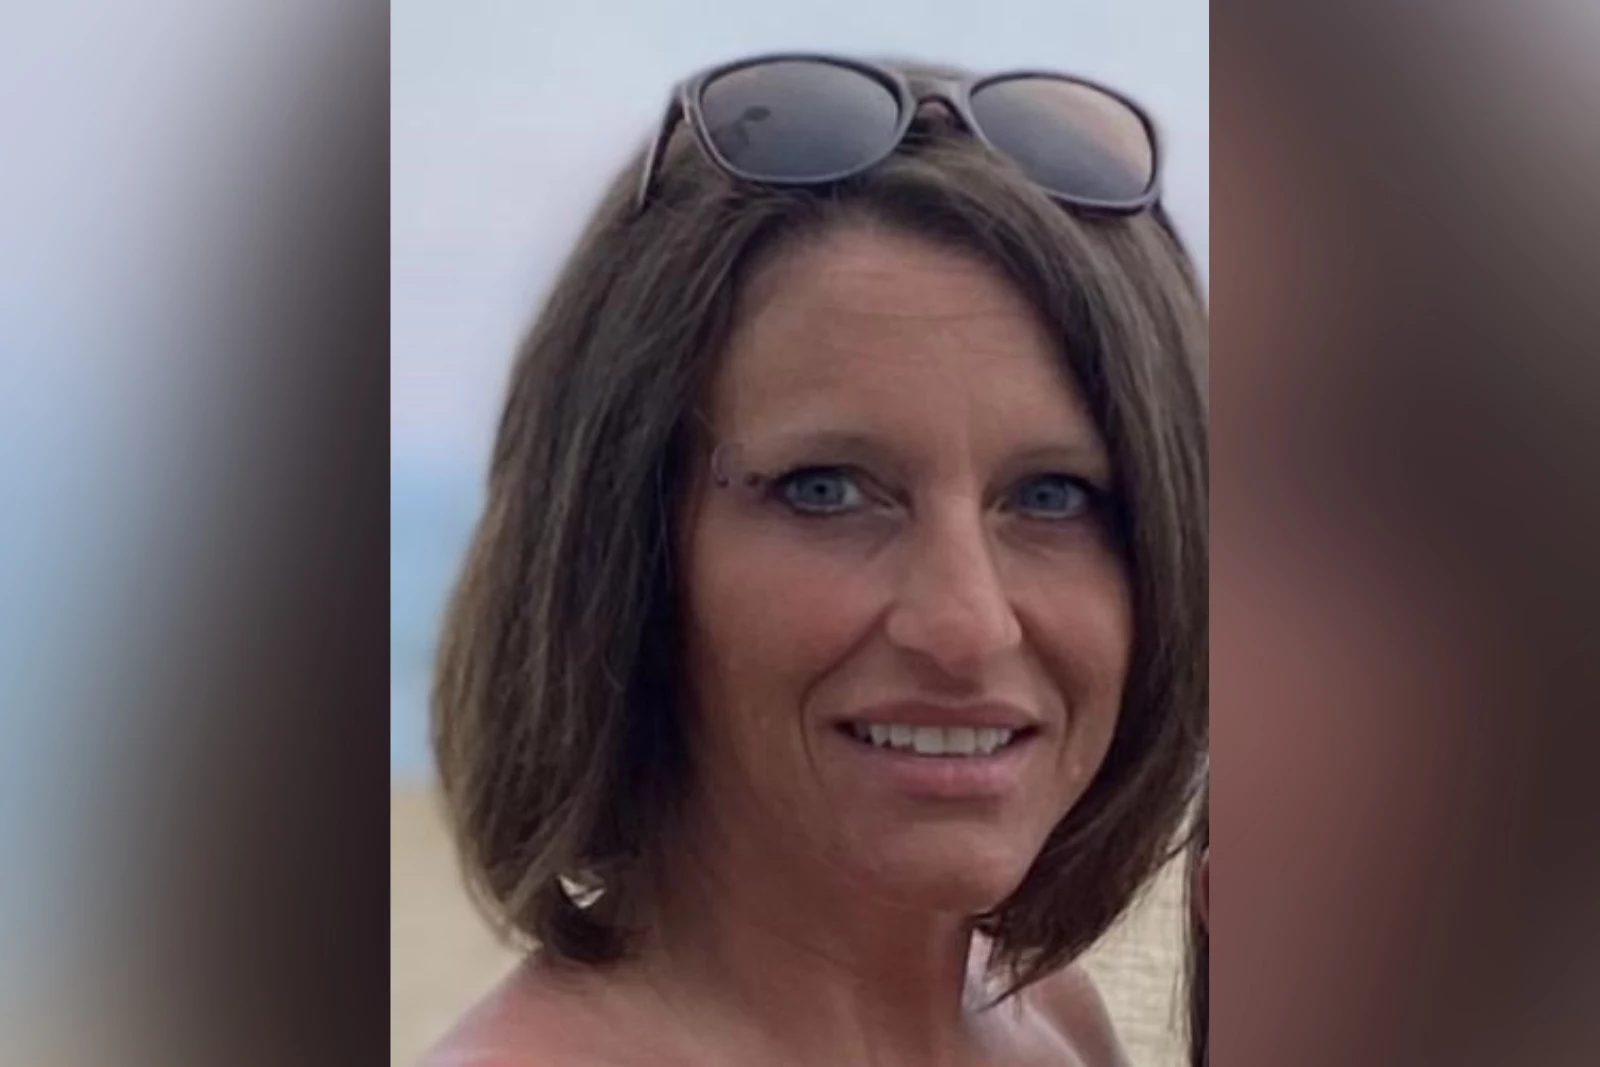 Hudson Valley Mom Unexpectedly Dies, Leaving Behind Five Kids